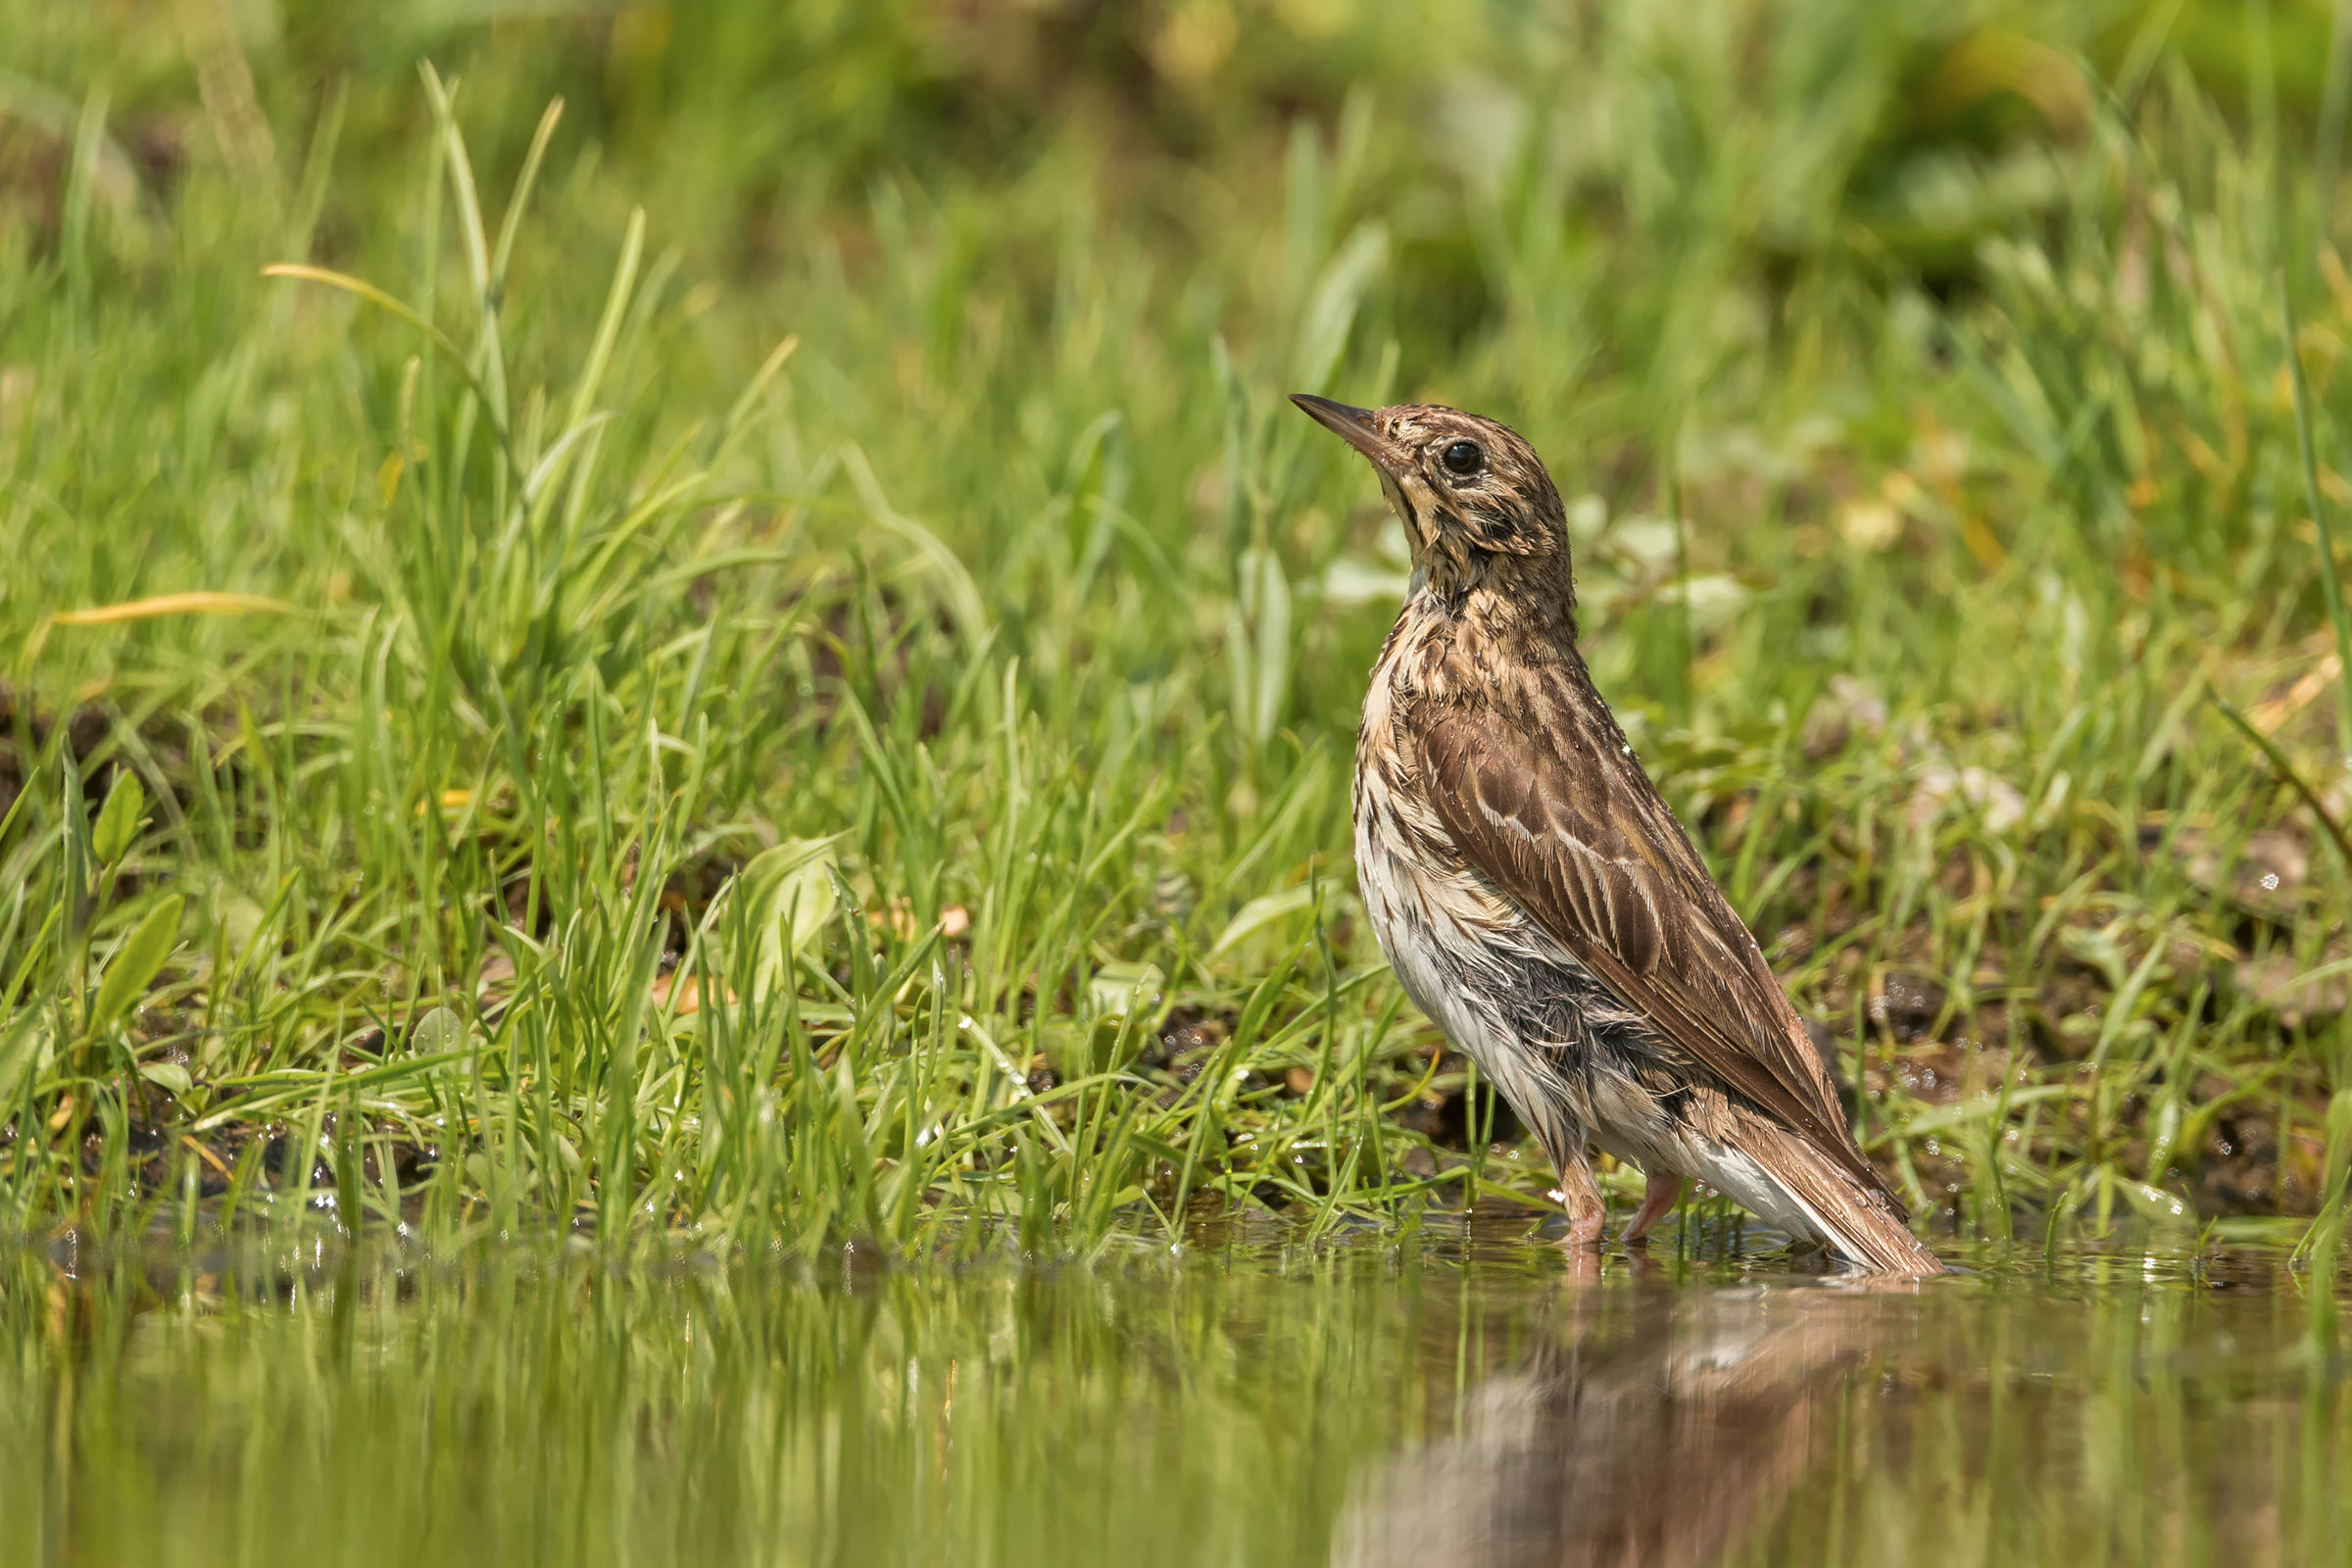 The bath of the tree Pipit...